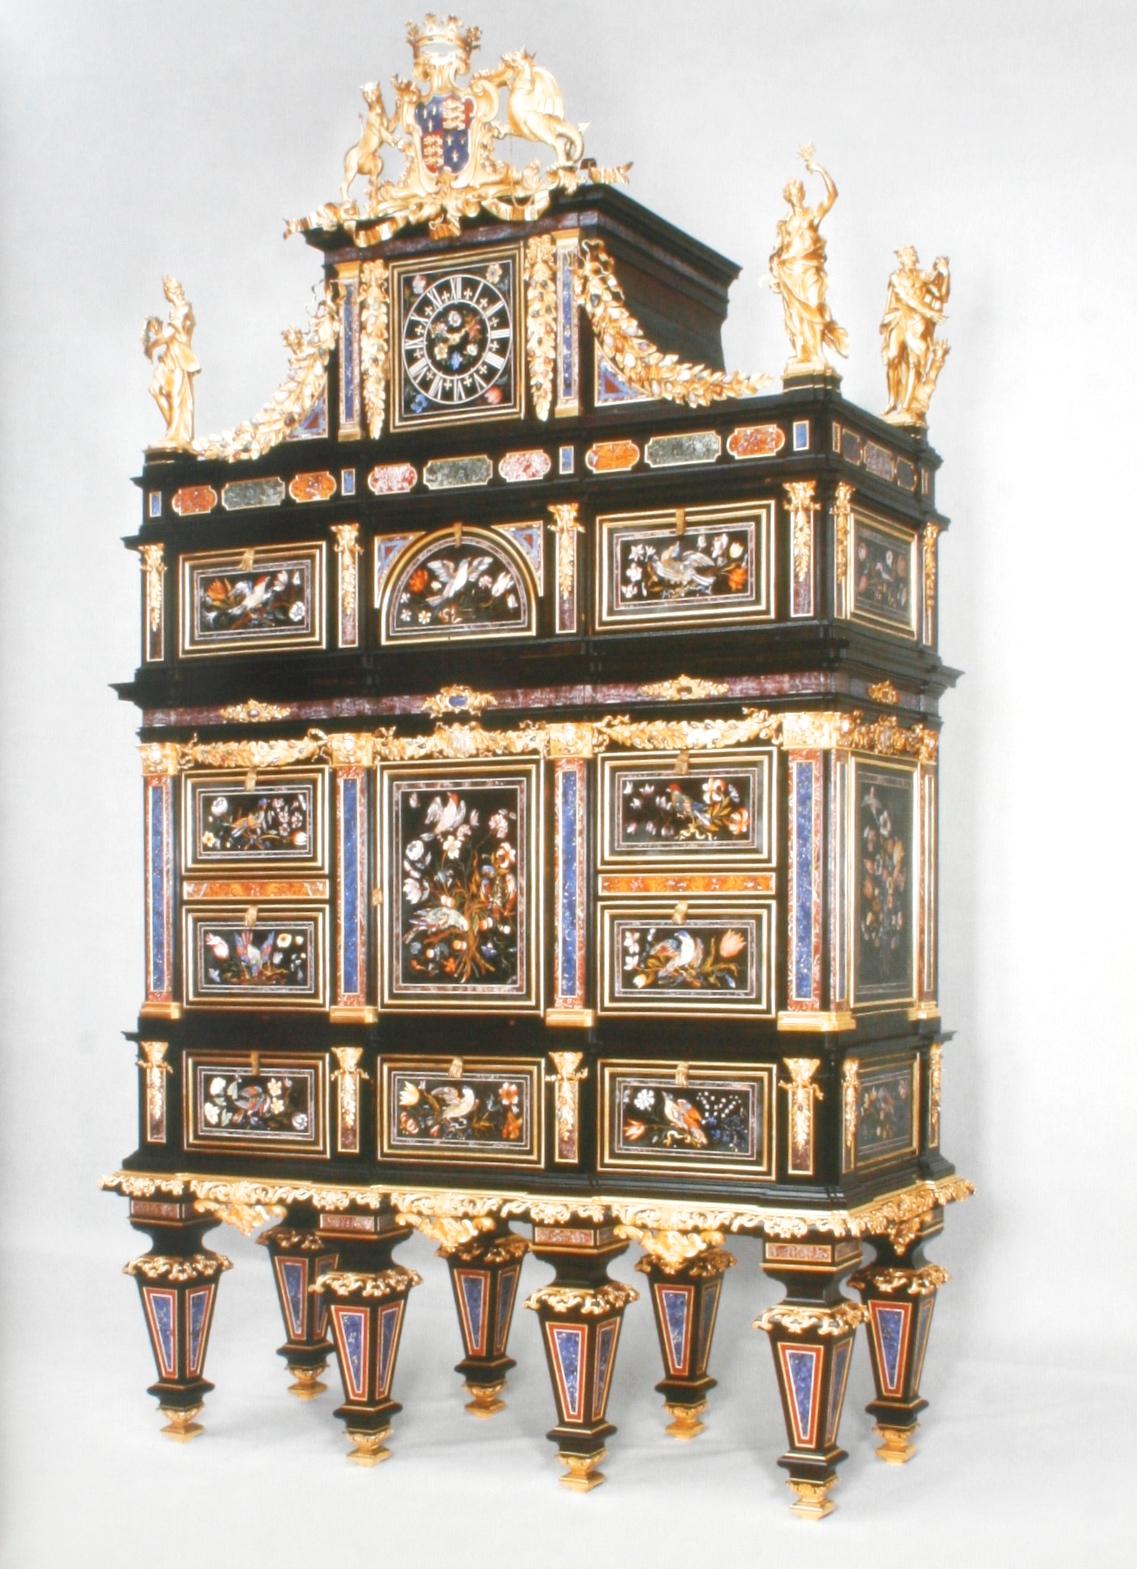 English Christie's London; The Badminton Cabinet, The Property of Mrs. Barbara Johnson For Sale